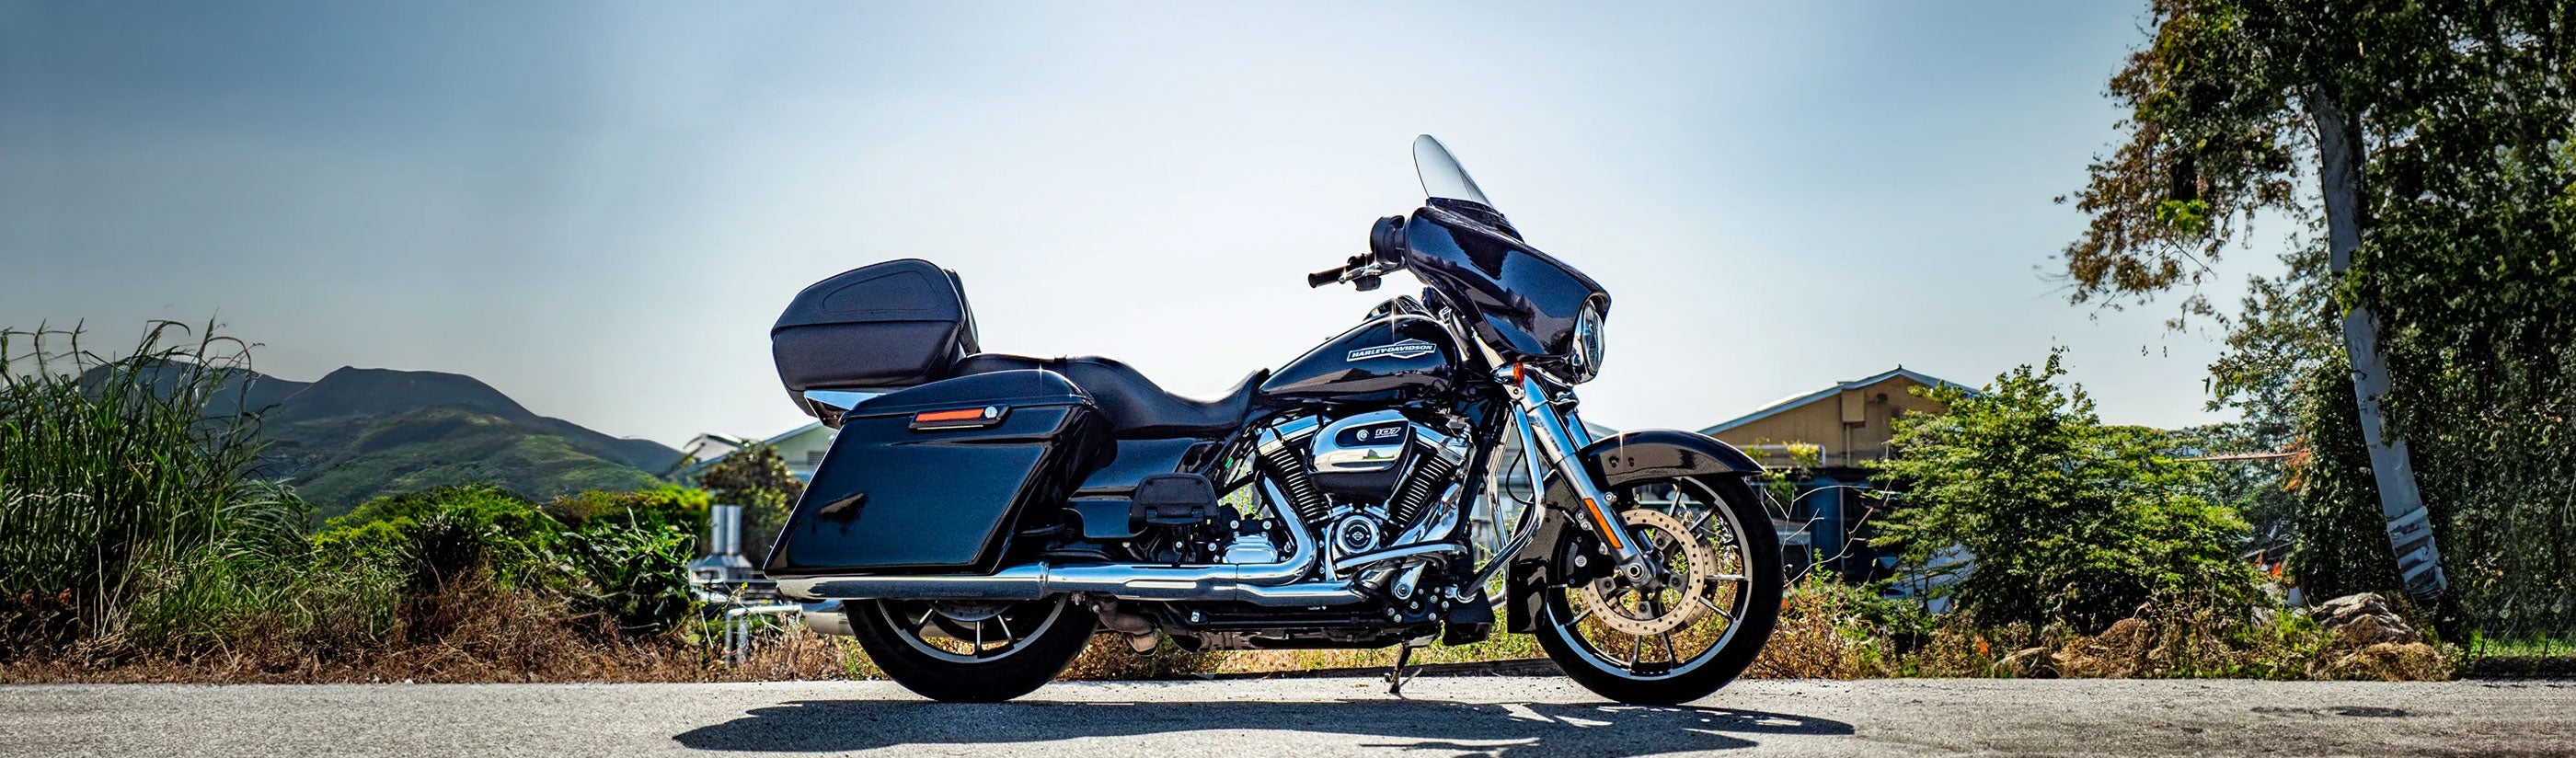 Harley Touring Street Glide FLHX 2014+ All Motorcycle Luggage Bags, Parts & Accessories By Bike